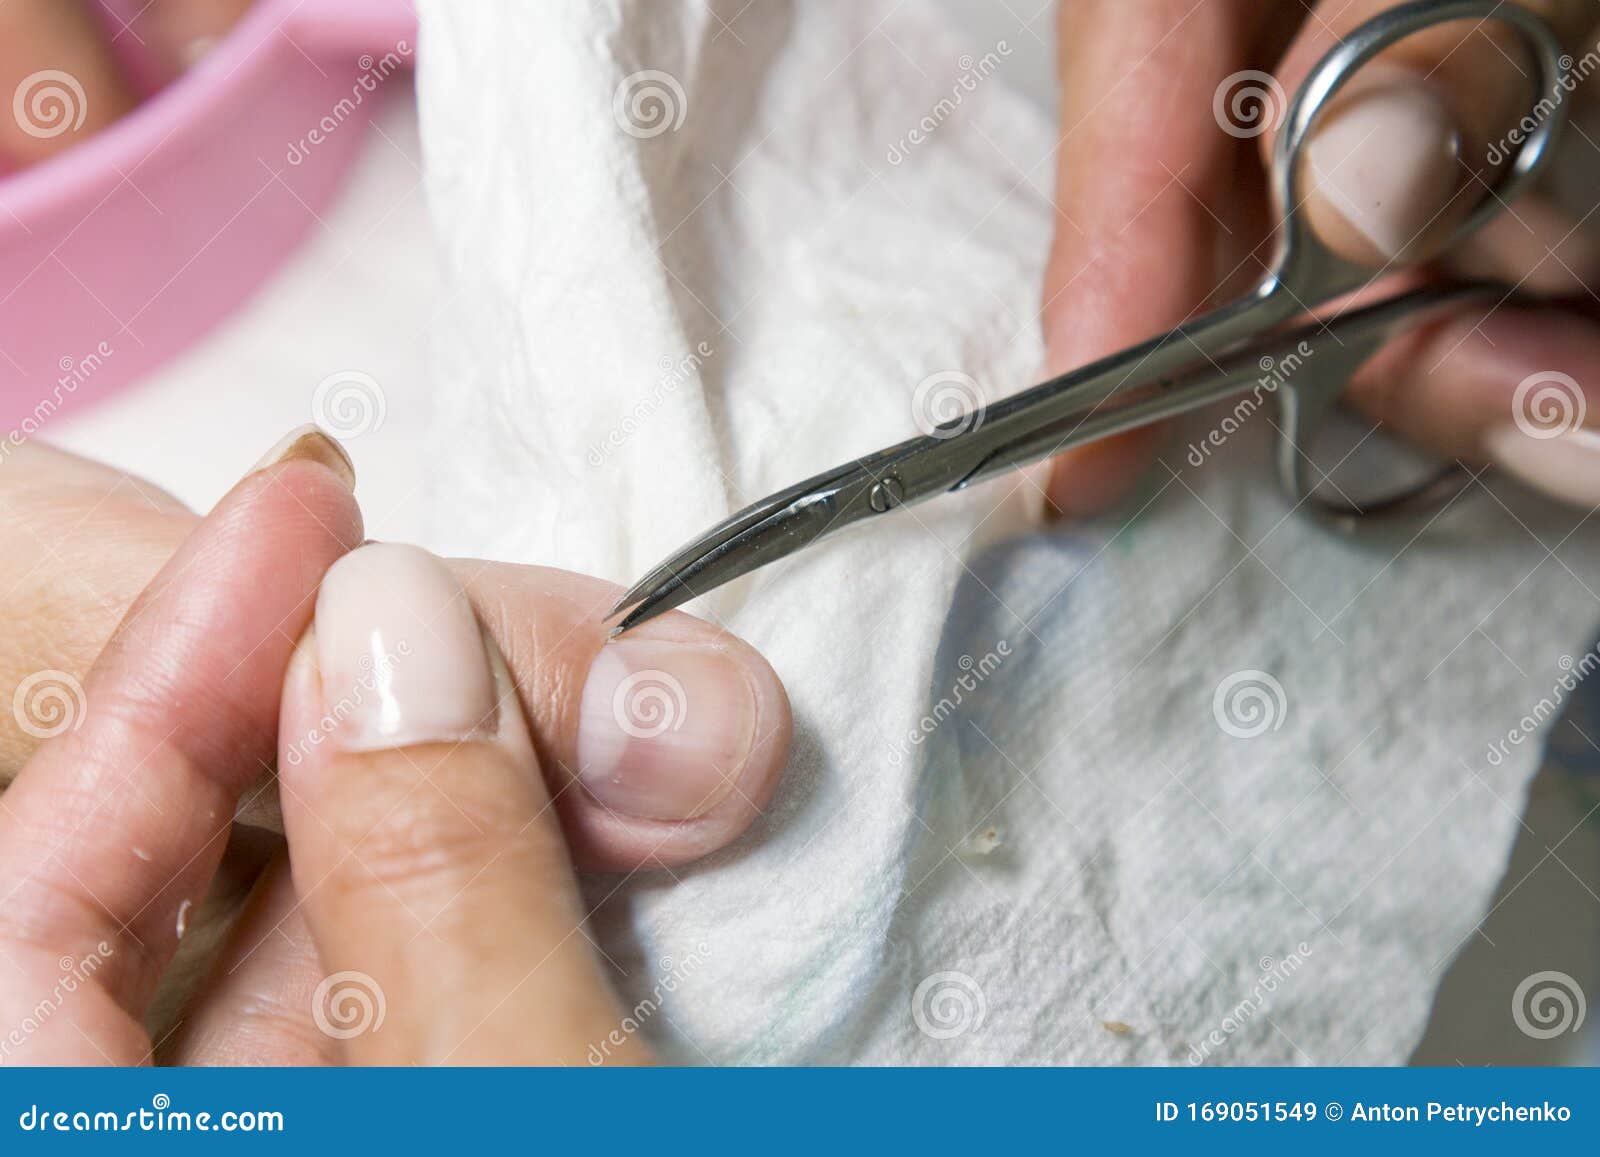 Hardware Pedicure, Preparation Of The Nail Plate For Applying Gel Polish.  Master Chiropody Shapes The Nails . Female Patient In The Process Of  Hardware Pedicure Procedure. Foot Care Stock Photo, Picture and